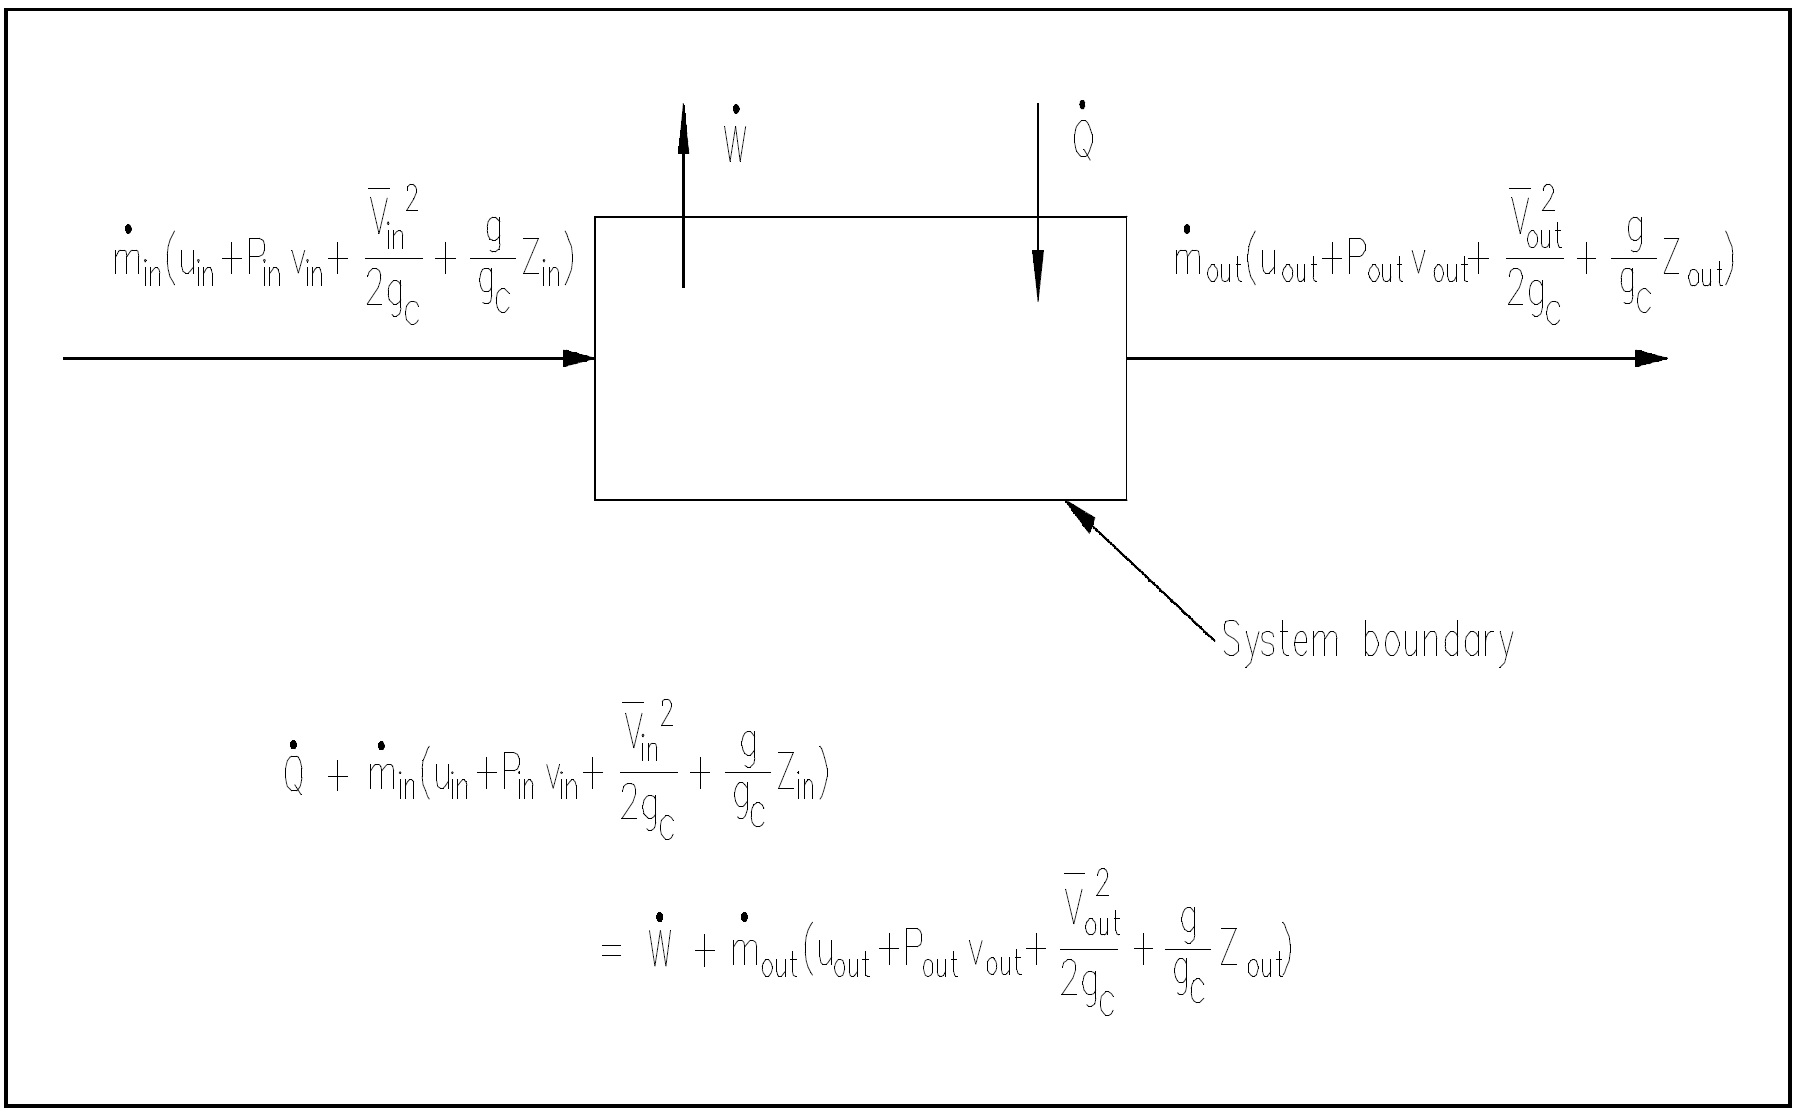 Figure 14: First Law of Thermodynamics